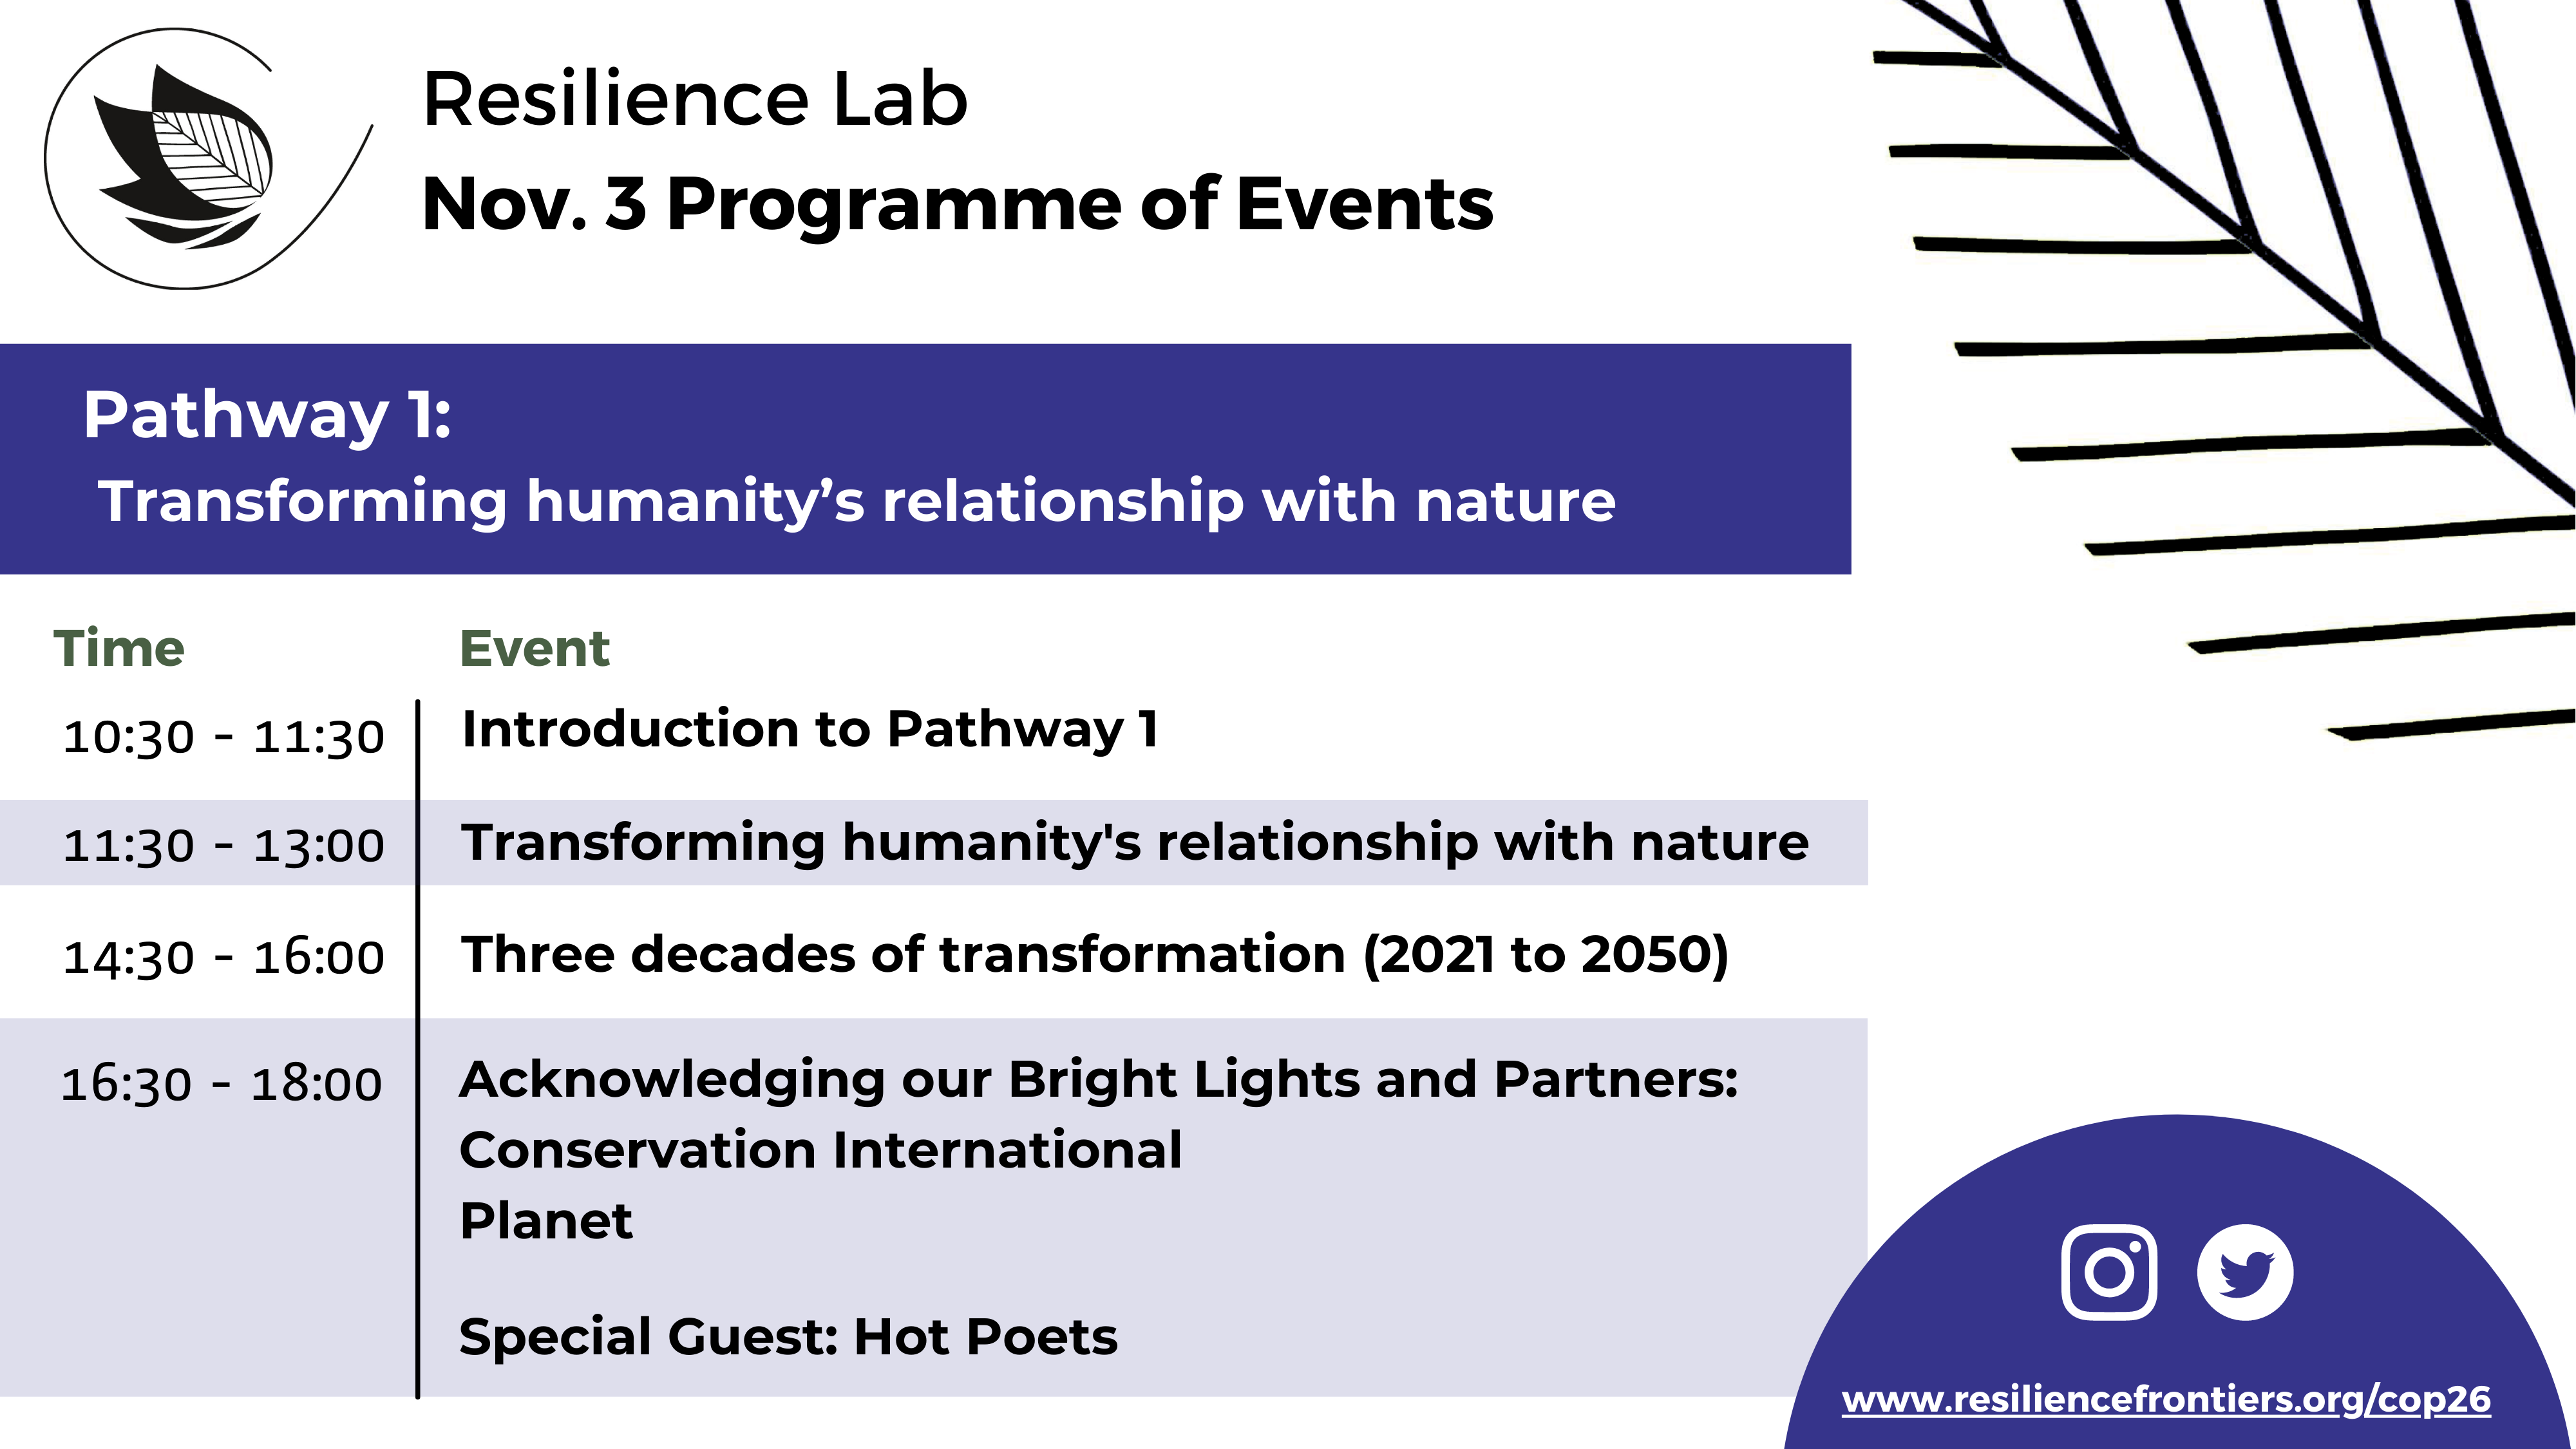 Resilience Lab Day 2 Programme of Events